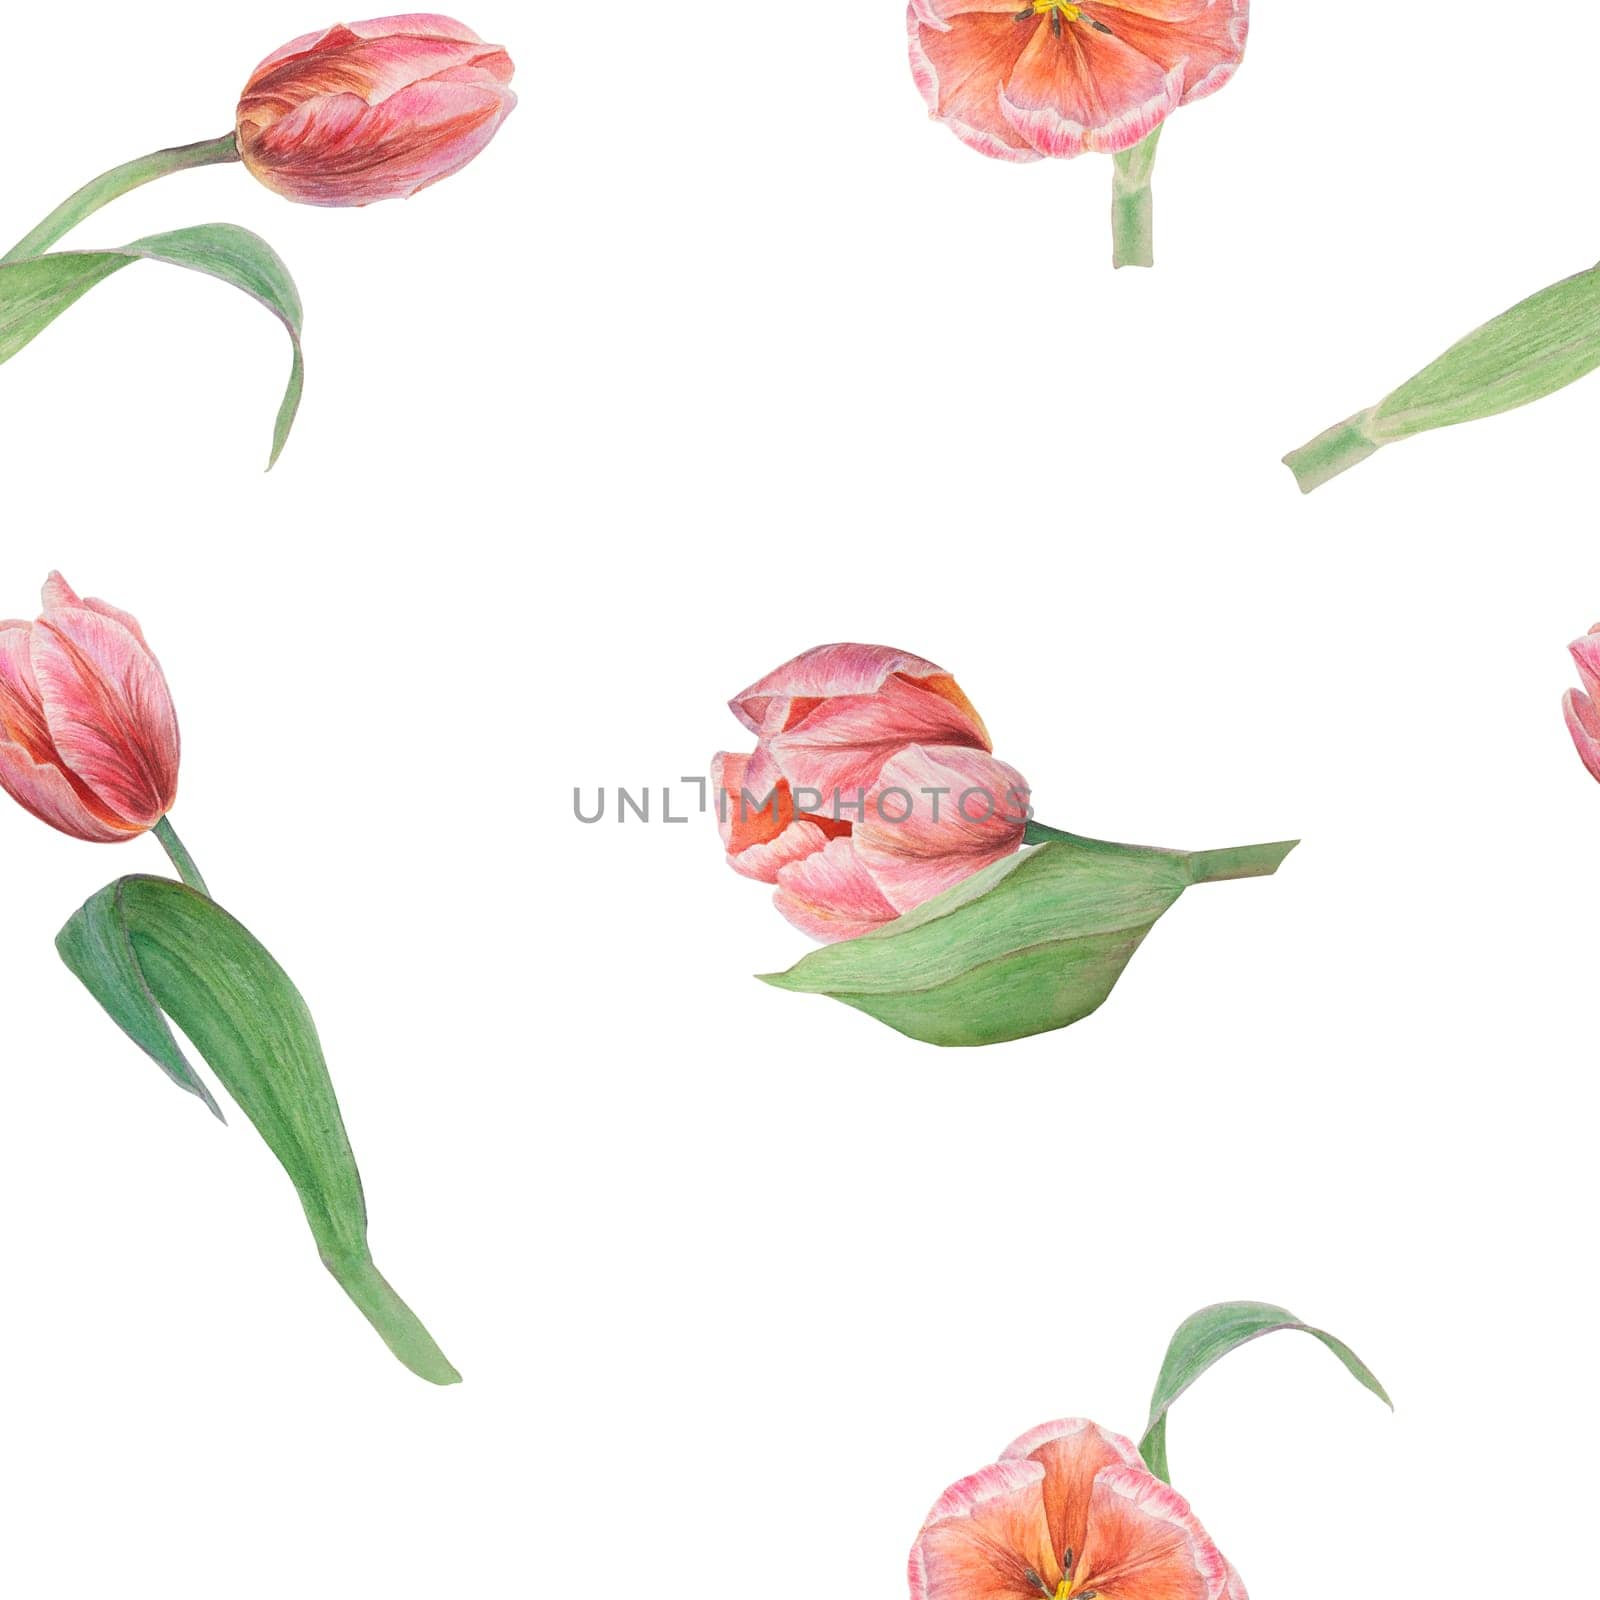 Pink tulips seamless pattern painted in watercolor, realistic botanical hand drawn illustration isolated on white background for design, wedding print products, paper, invitations, cards, fabric, posters, card for Mother's day, March 8, Easter, festivals